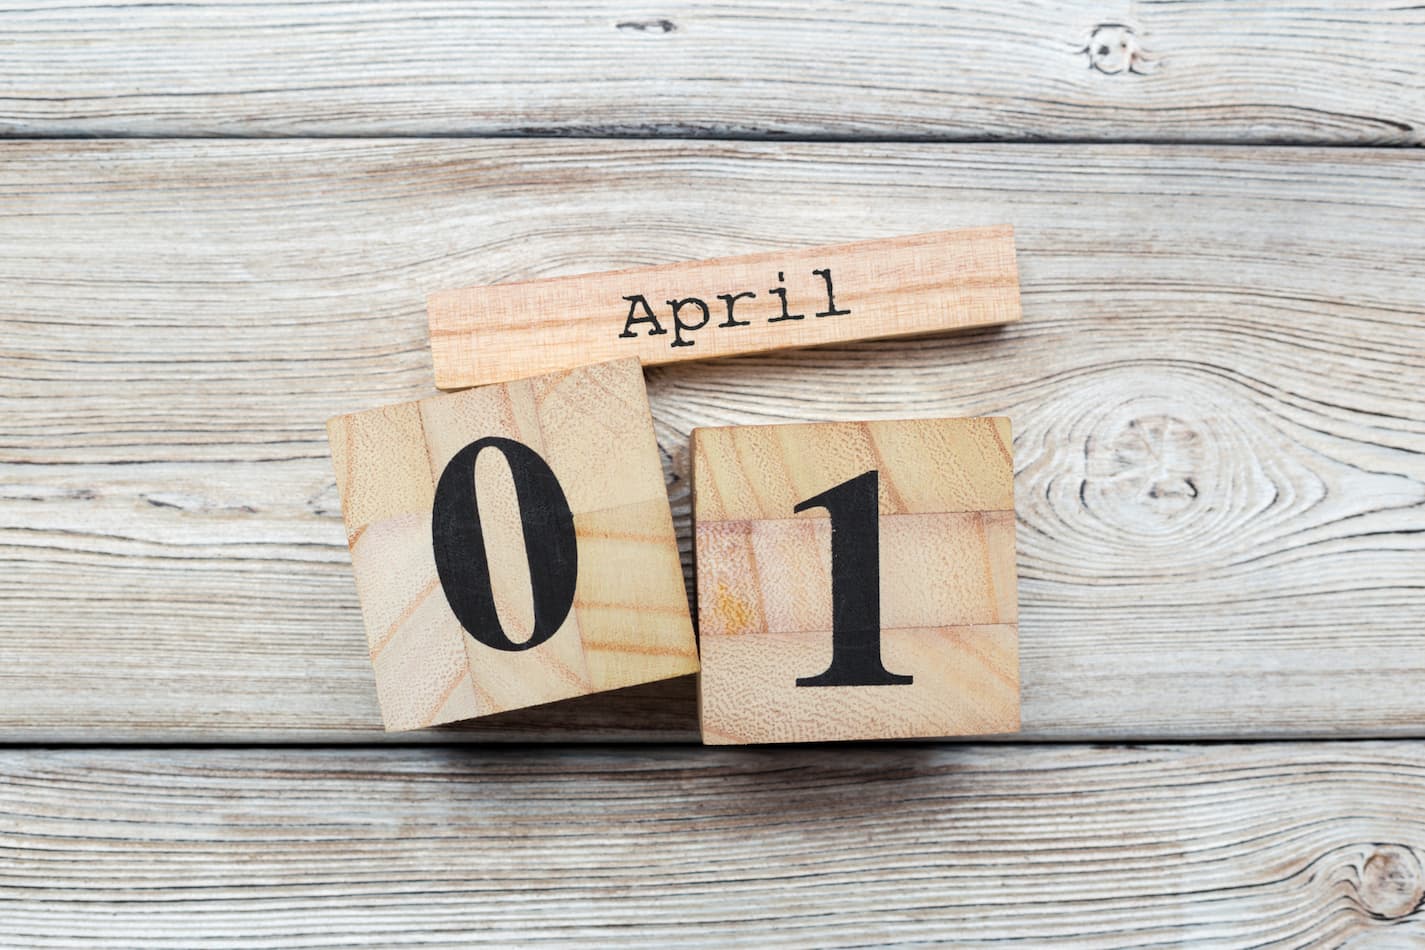 image of blocks with April 01 on a wooden background